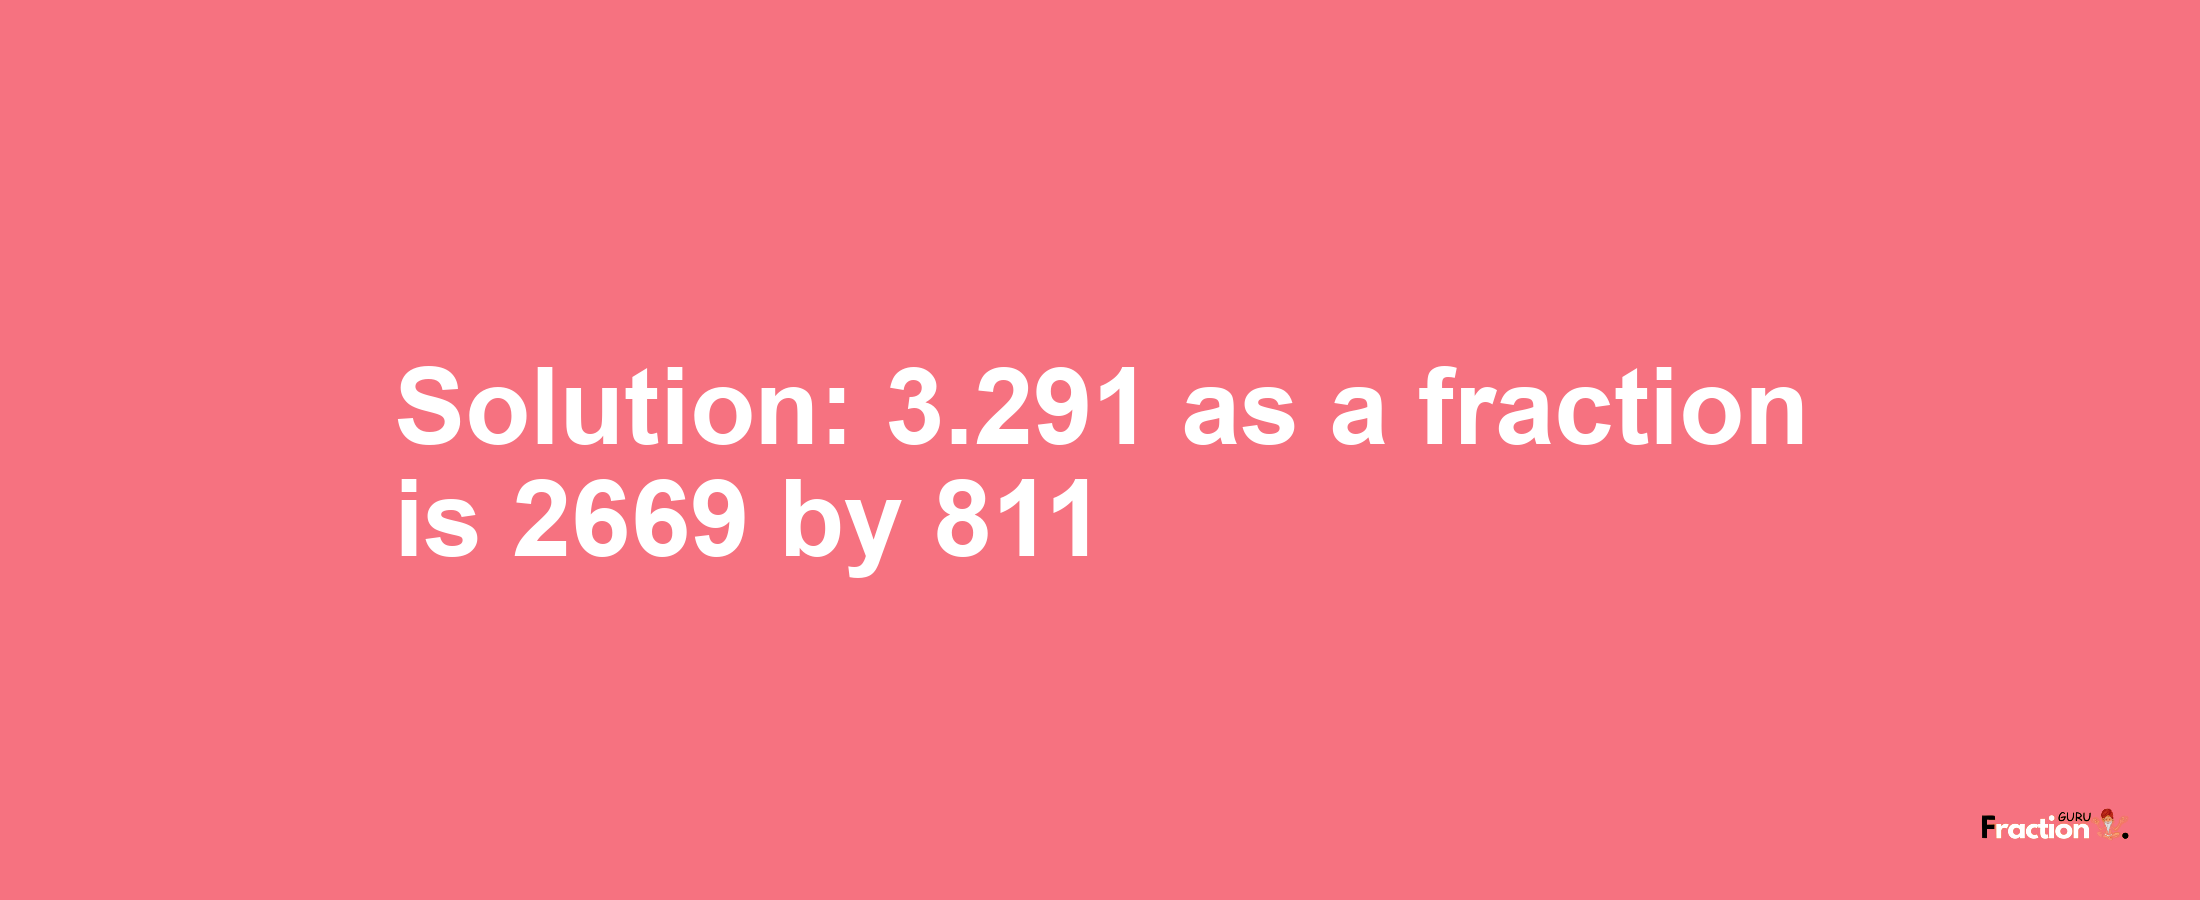 Solution:3.291 as a fraction is 2669/811